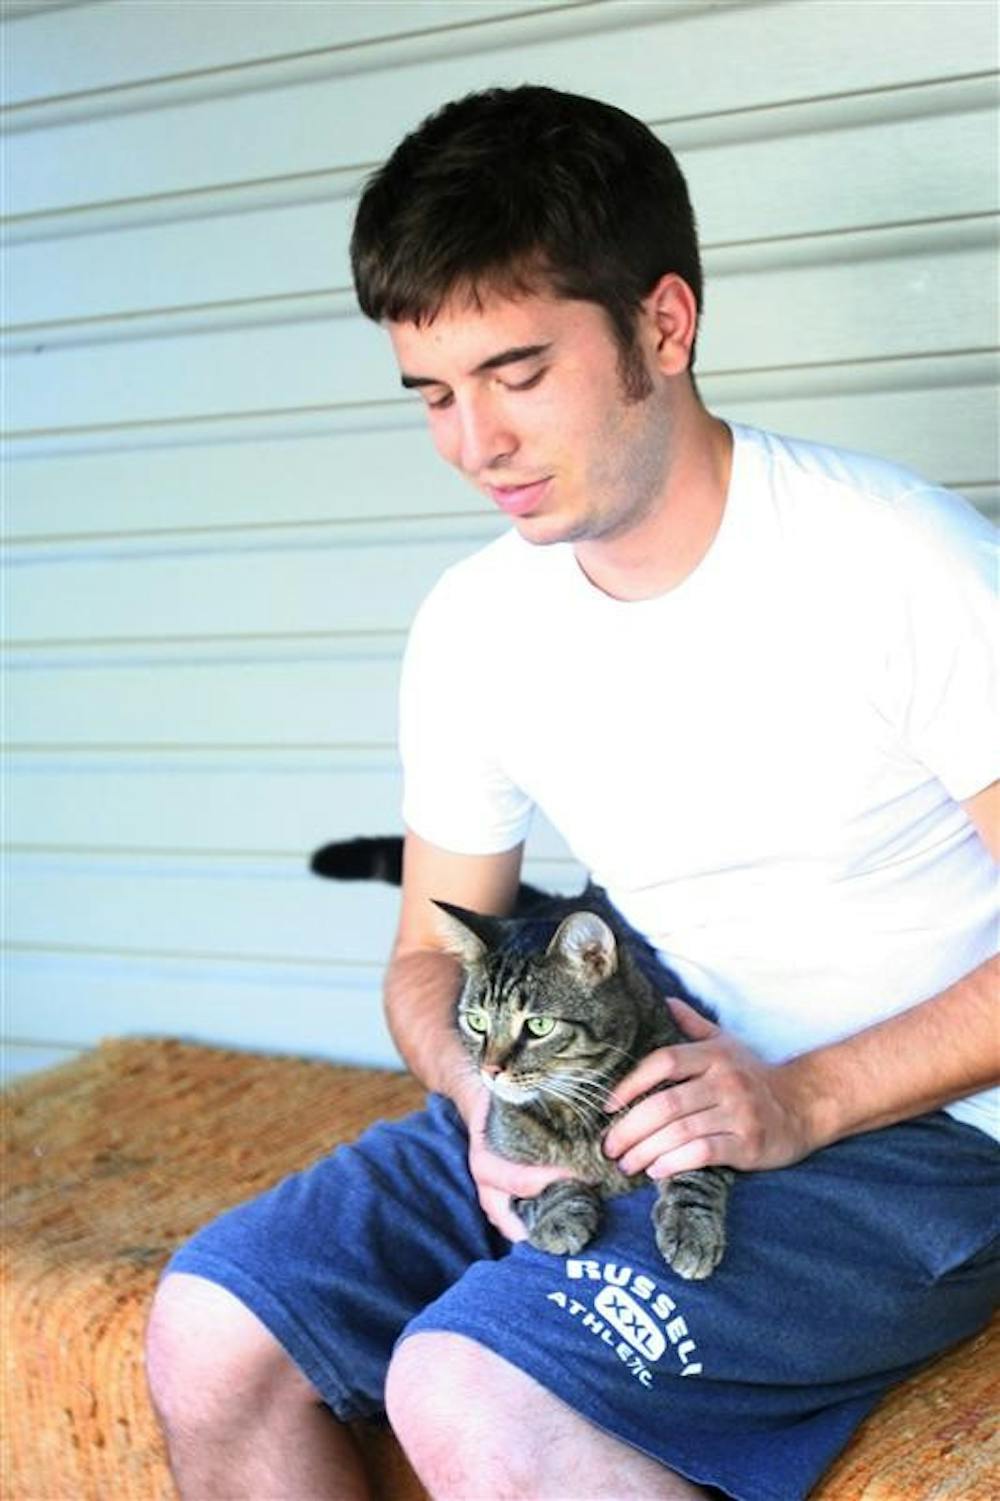 Senior Levi Shand holds a stray cat, Morris, that he got for his girlfriend as a Christmas present on Sept. 17 at his home.